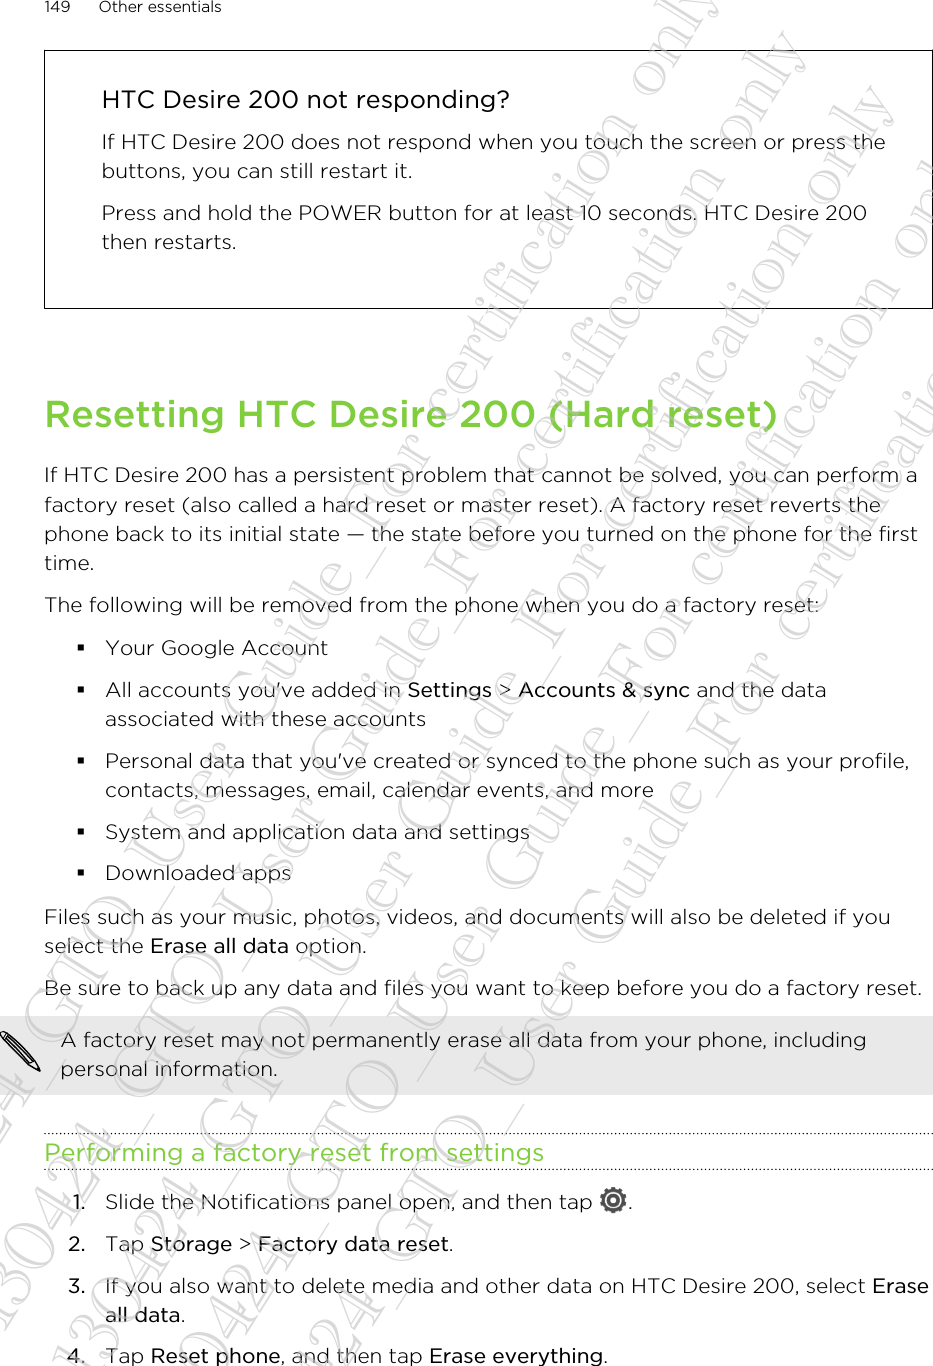 HTC Desire 200 not responding?If HTC Desire 200 does not respond when you touch the screen or press thebuttons, you can still restart it.Press and hold the POWER button for at least 10 seconds. HTC Desire 200then restarts.Resetting HTC Desire 200 (Hard reset)If HTC Desire 200 has a persistent problem that cannot be solved, you can perform afactory reset (also called a hard reset or master reset). A factory reset reverts thephone back to its initial state — the state before you turned on the phone for the firsttime.The following will be removed from the phone when you do a factory reset:§Your Google Account§All accounts you&apos;ve added in Settings &gt; Accounts &amp; sync and the dataassociated with these accounts§Personal data that you&apos;ve created or synced to the phone such as your profile,contacts, messages, email, calendar events, and more§System and application data and settings§Downloaded appsFiles such as your music, photos, videos, and documents will also be deleted if youselect the Erase all data option.Be sure to back up any data and files you want to keep before you do a factory reset.A factory reset may not permanently erase all data from your phone, includingpersonal information.Performing a factory reset from settings1. Slide the Notifications panel open, and then tap  .2. Tap Storage &gt; Factory data reset.3. If you also want to delete media and other data on HTC Desire 200, select Eraseall data.4. Tap Reset phone, and then tap Erase everything.149 Other essentials20130424_GTO_User Guide_For certification only 20130424_GTO_User Guide_For certification only 20130424_GTO_User Guide_For certification only 20130424_GTO_User Guide_For certification only 20130424_GTO_User Guide_For certification only